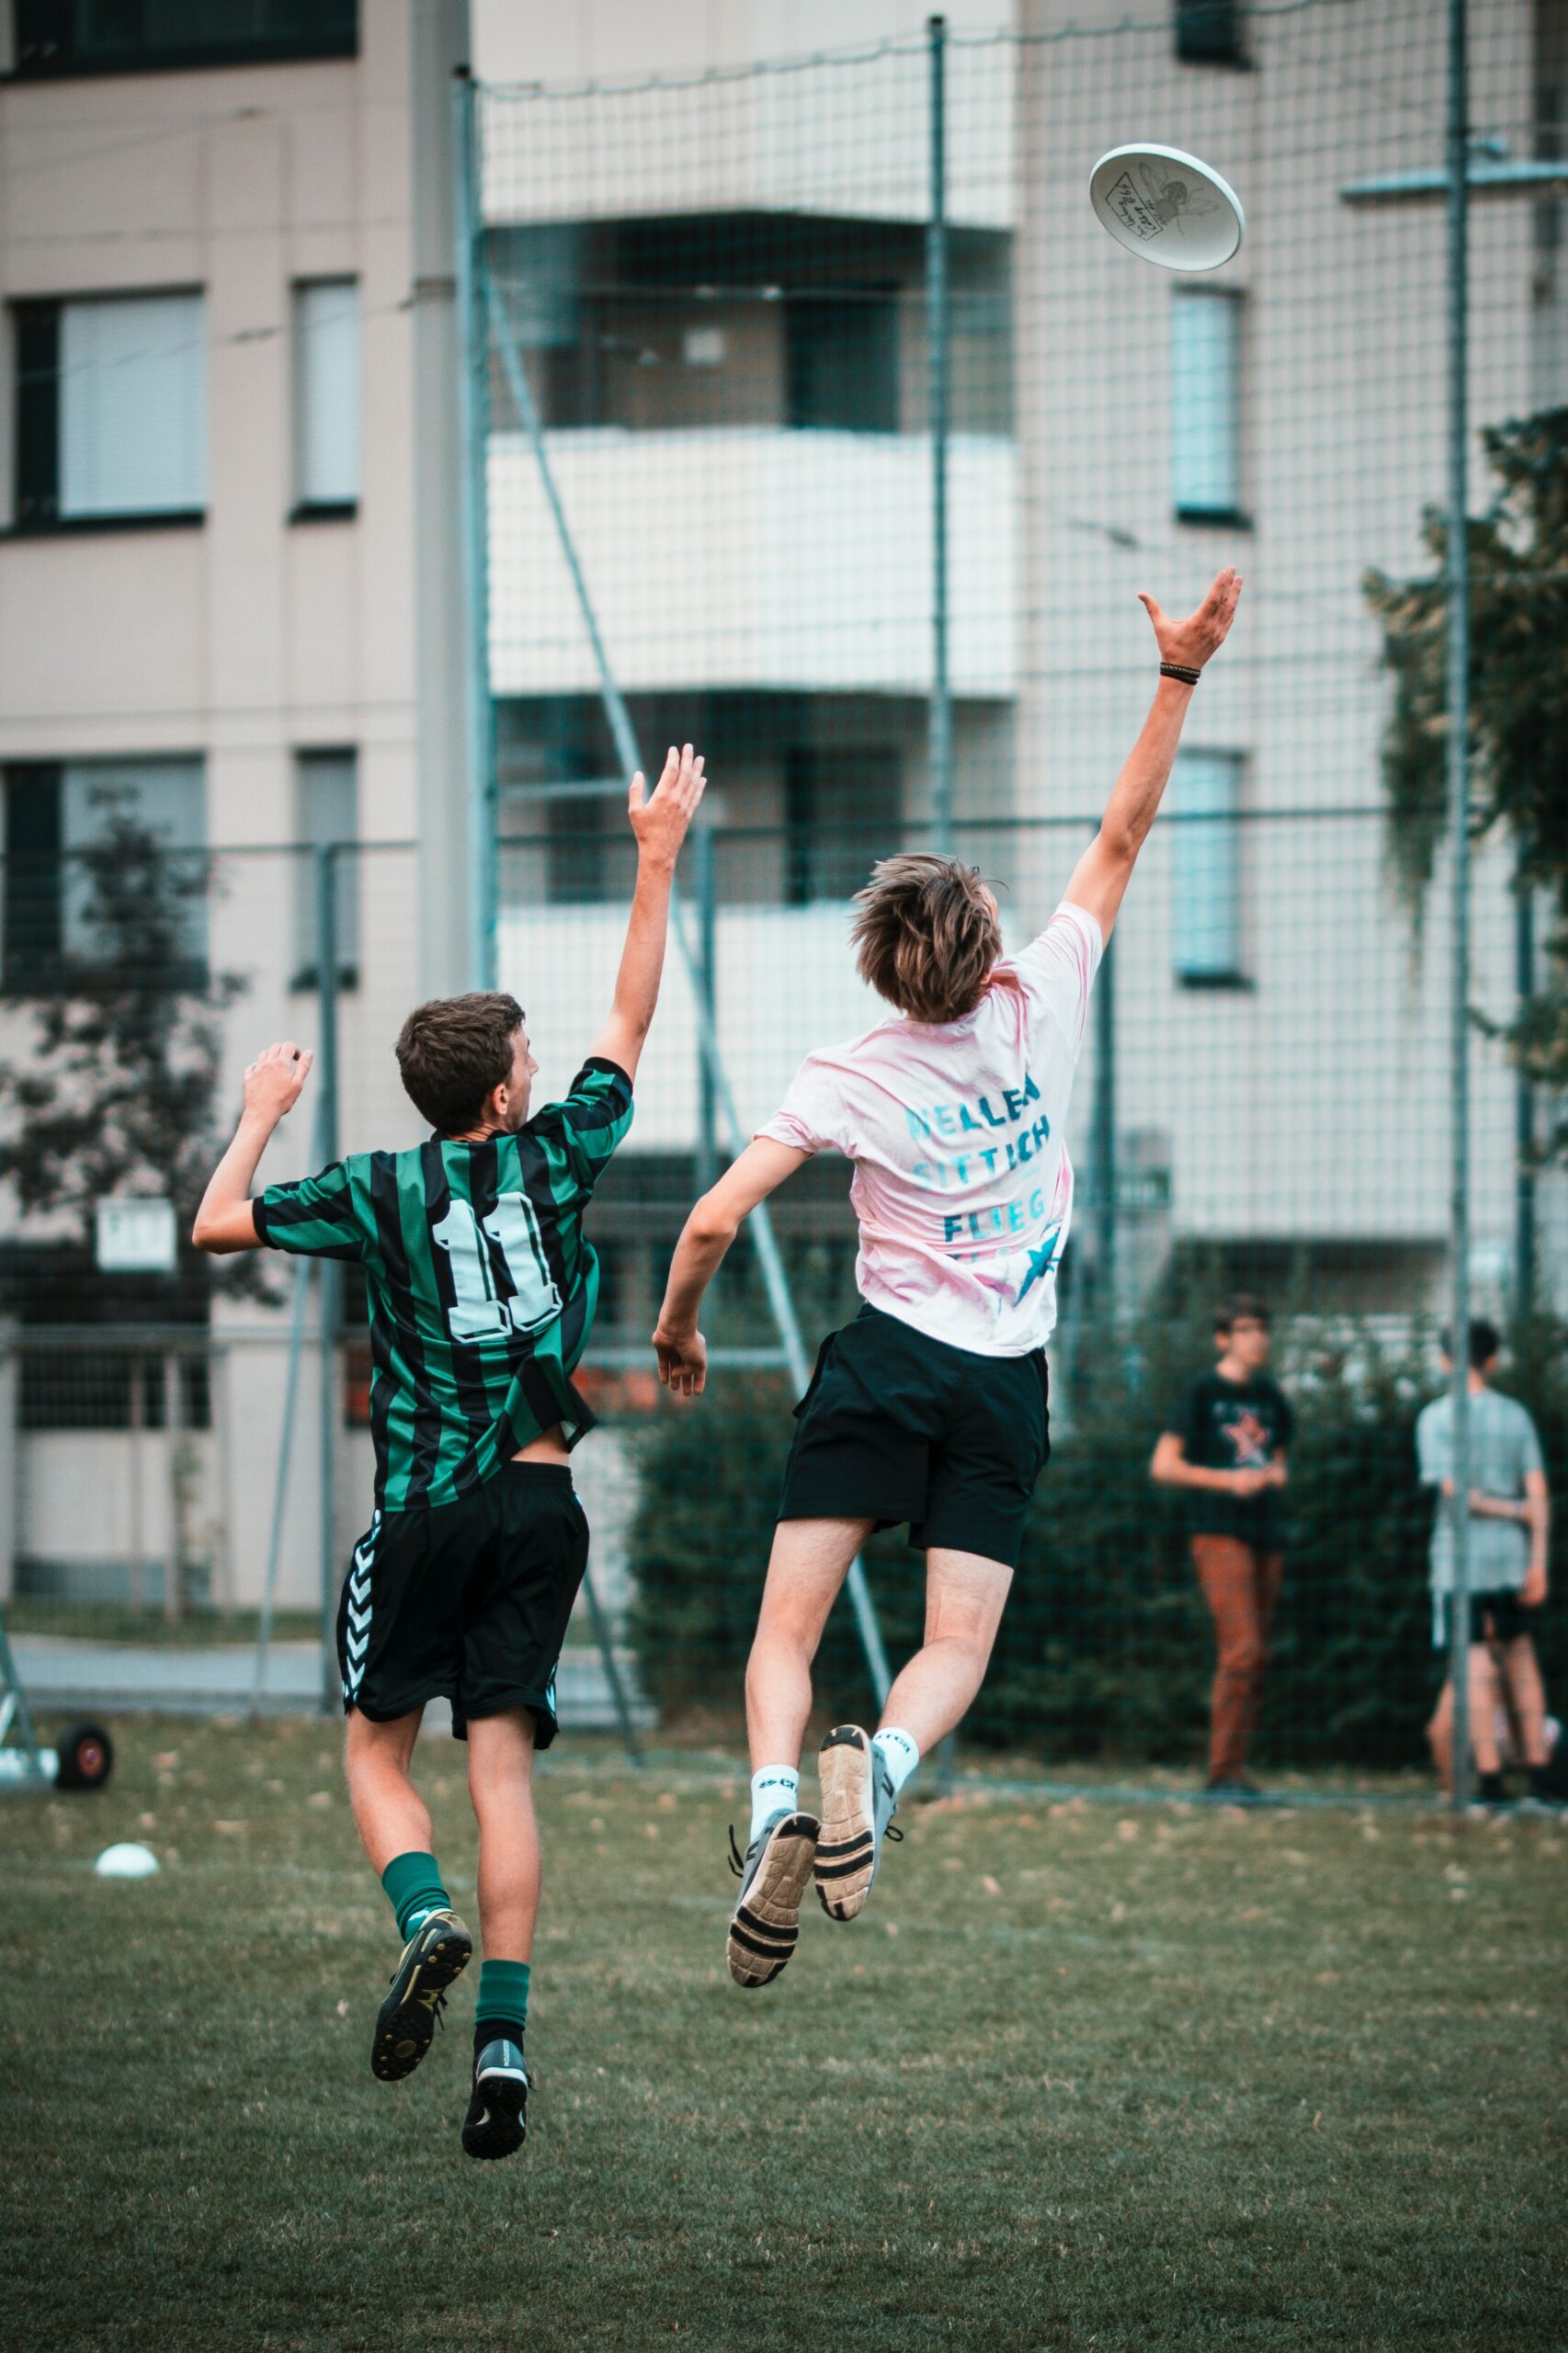 Photo of two people jumping in the air to catch a frisbee